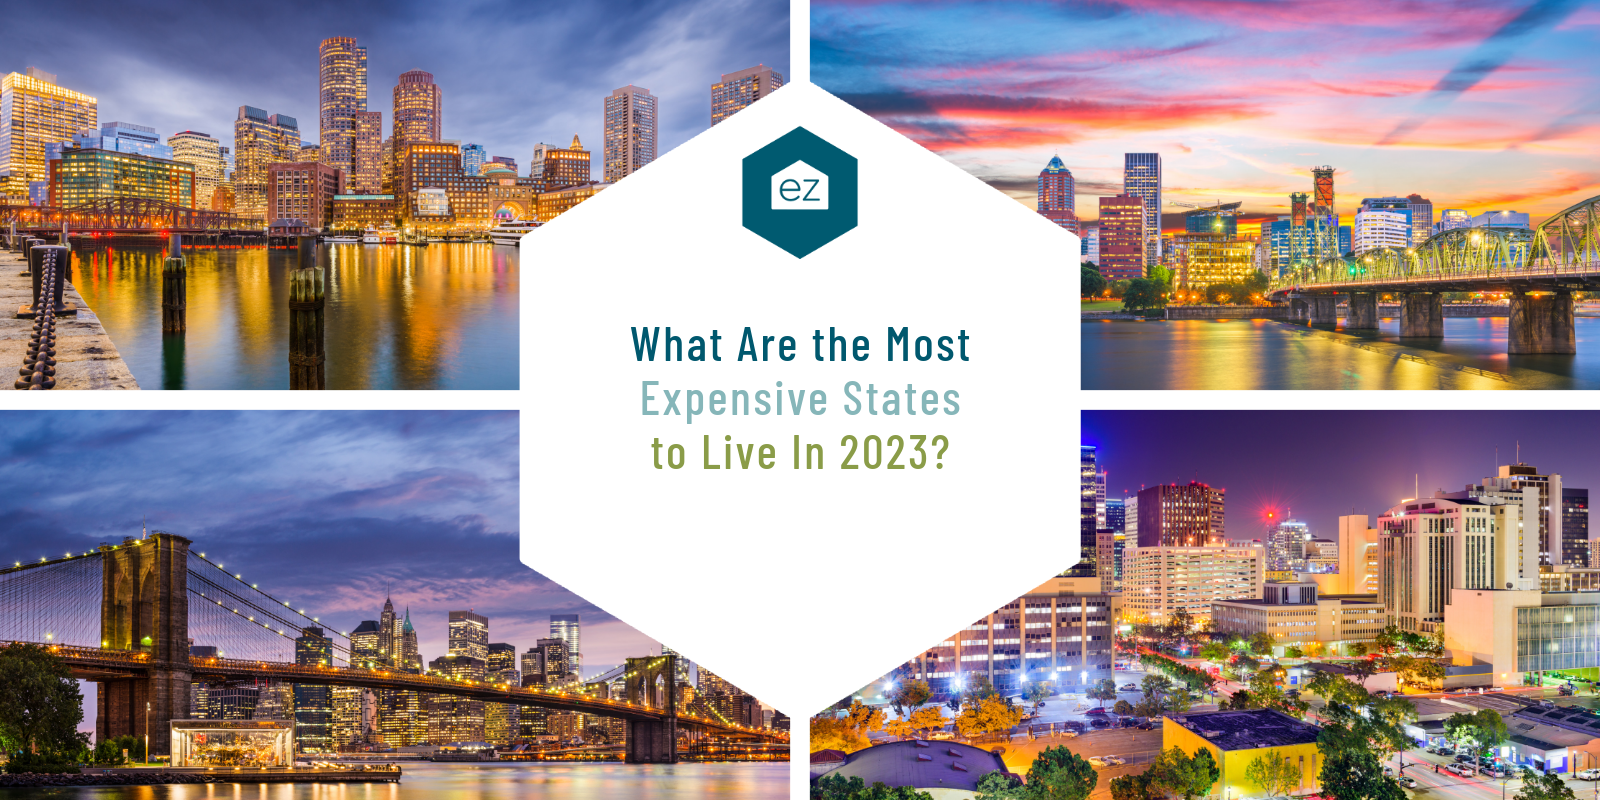 What Are the Most Expensive States to Live In 2023?